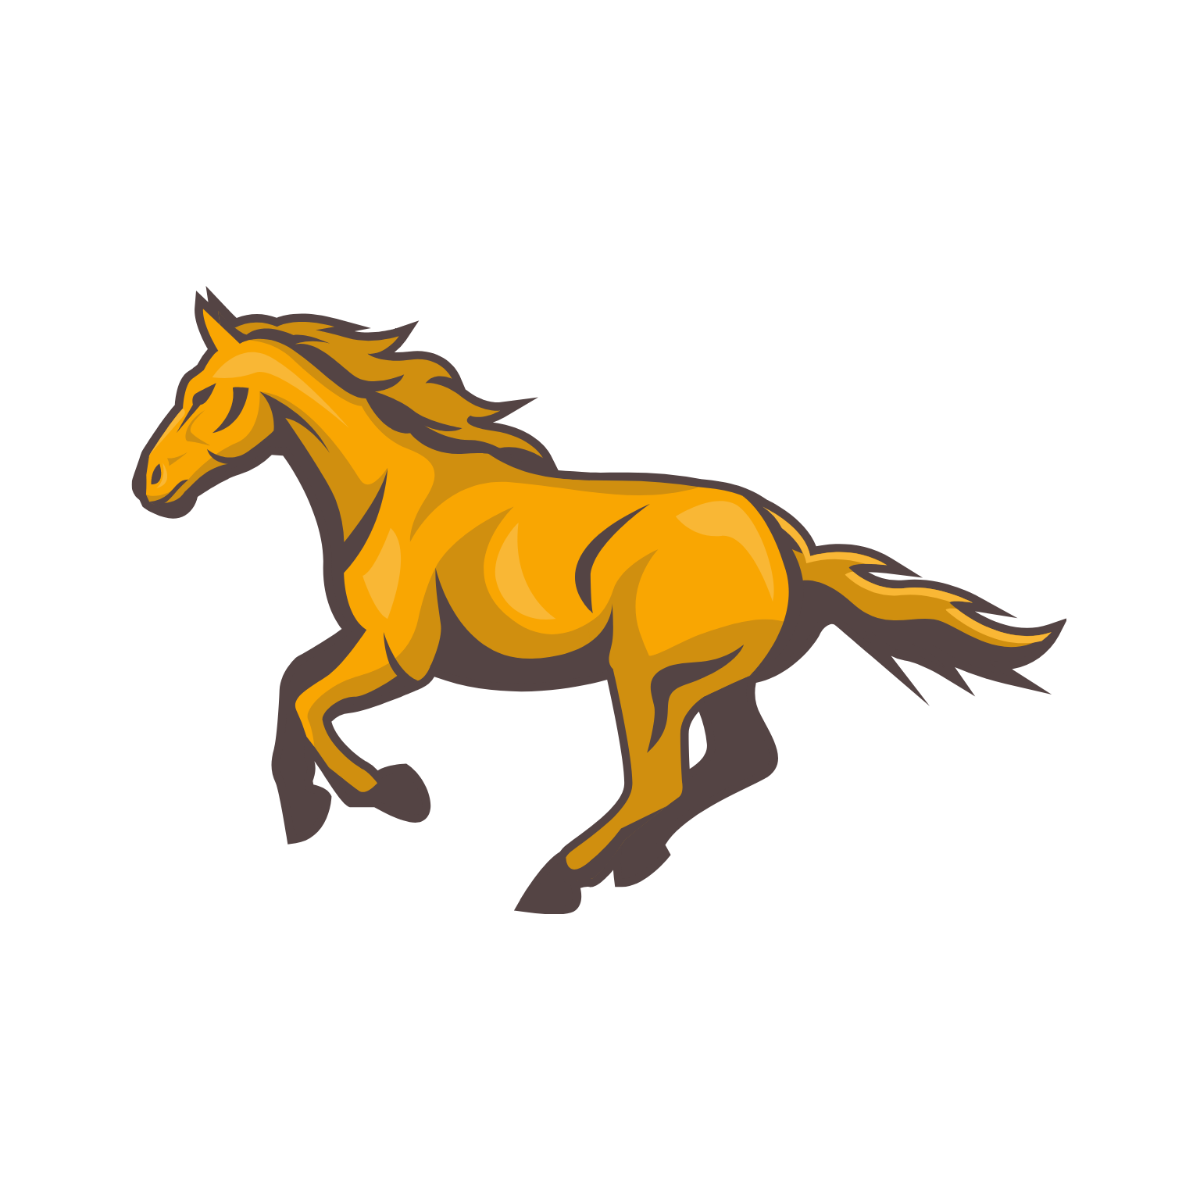 Galloping Horse clipart Template